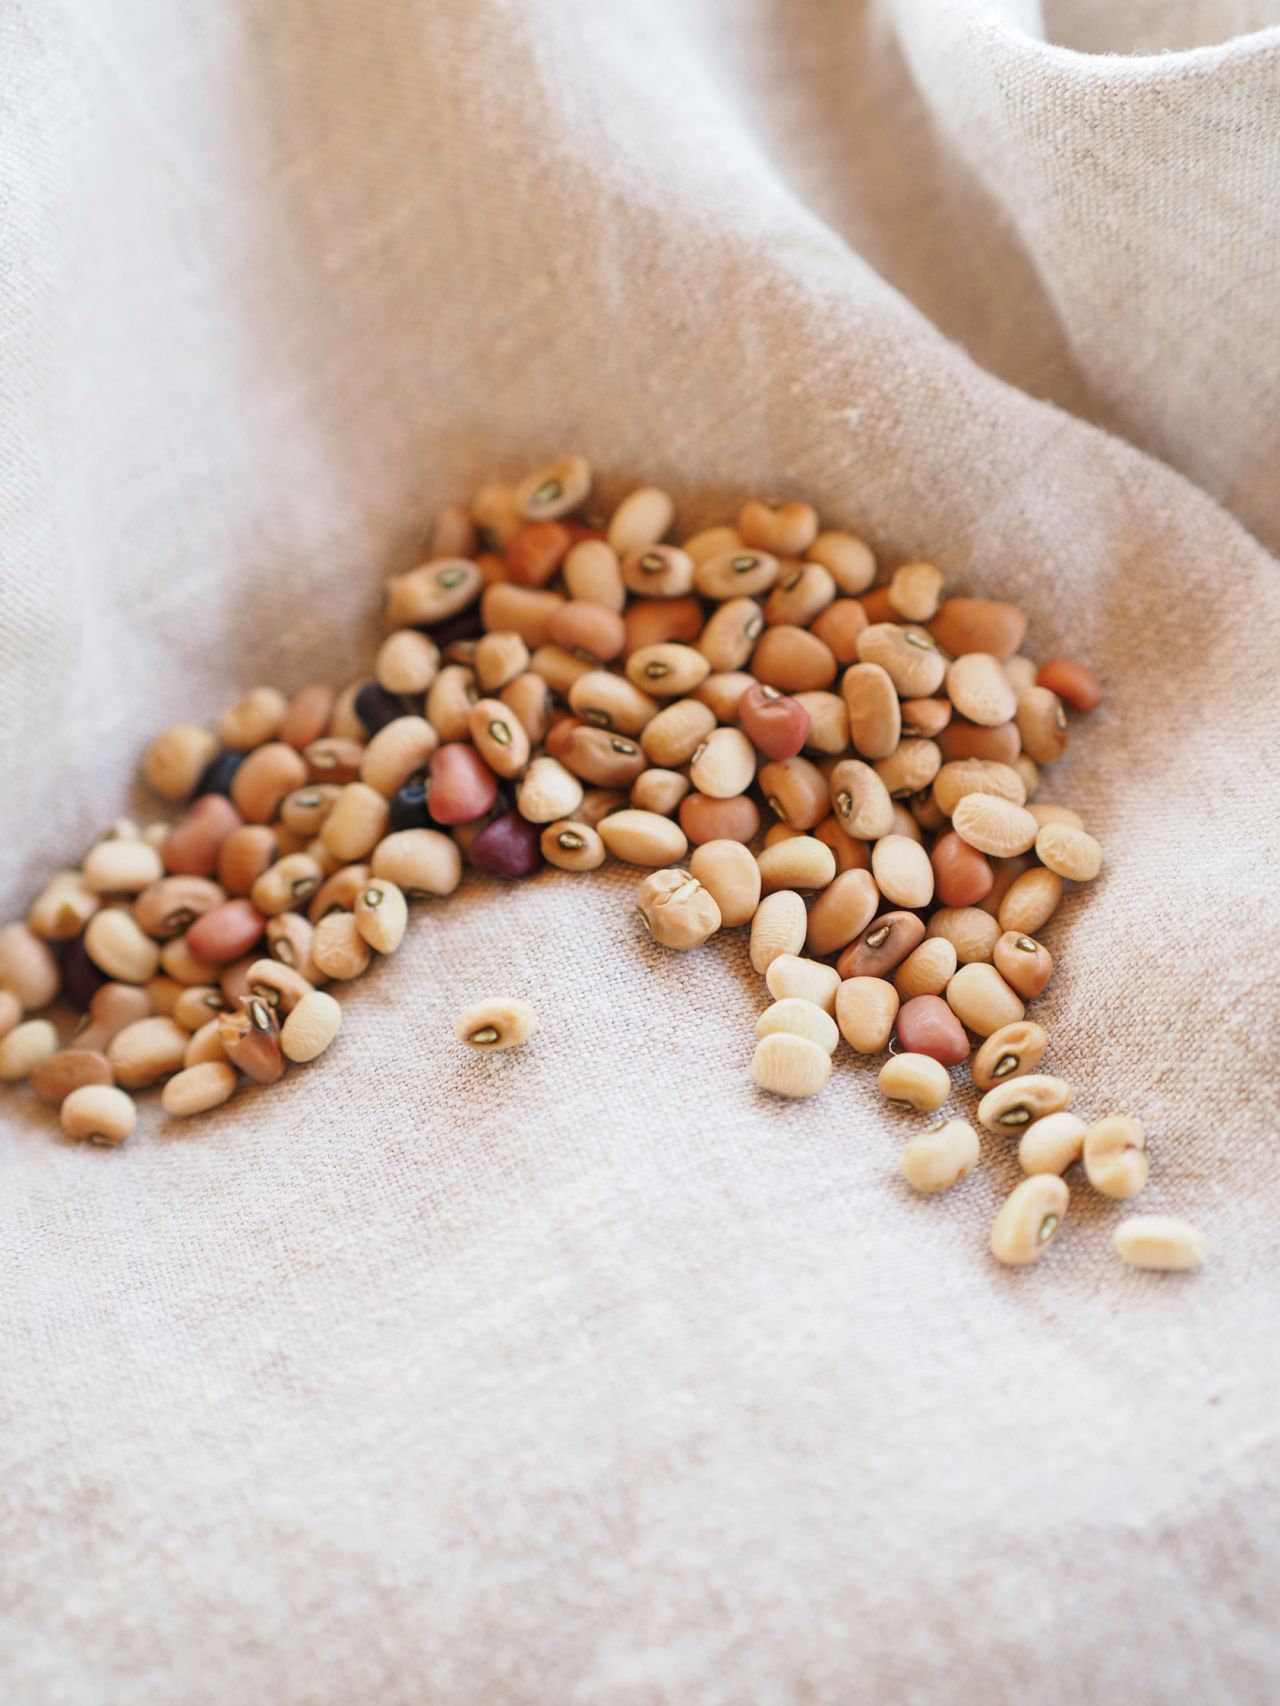 Trasimeno's 'fagiolina' bean used to be rabbit food. Now it's a prized ingredient.